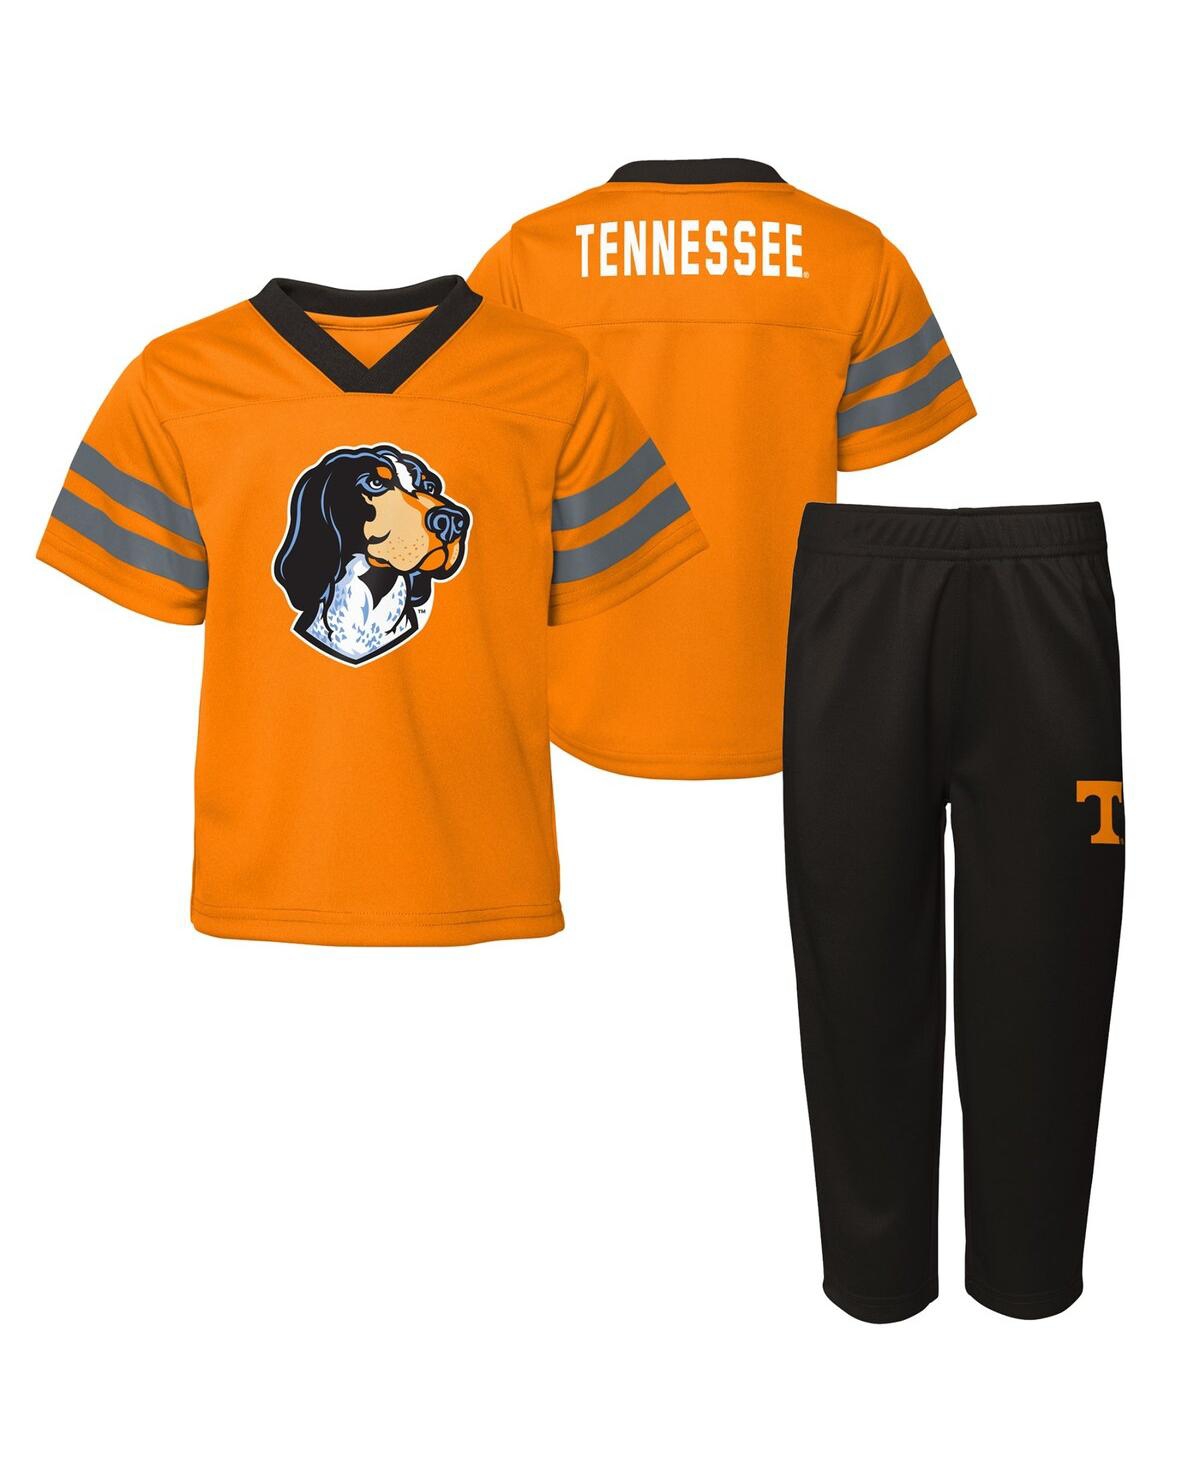 Outerstuff Babies' Toddler Boys And Girls Tennessee Orange Tennessee Volunteers Two-piece Red Zone Jersey And Pants Set